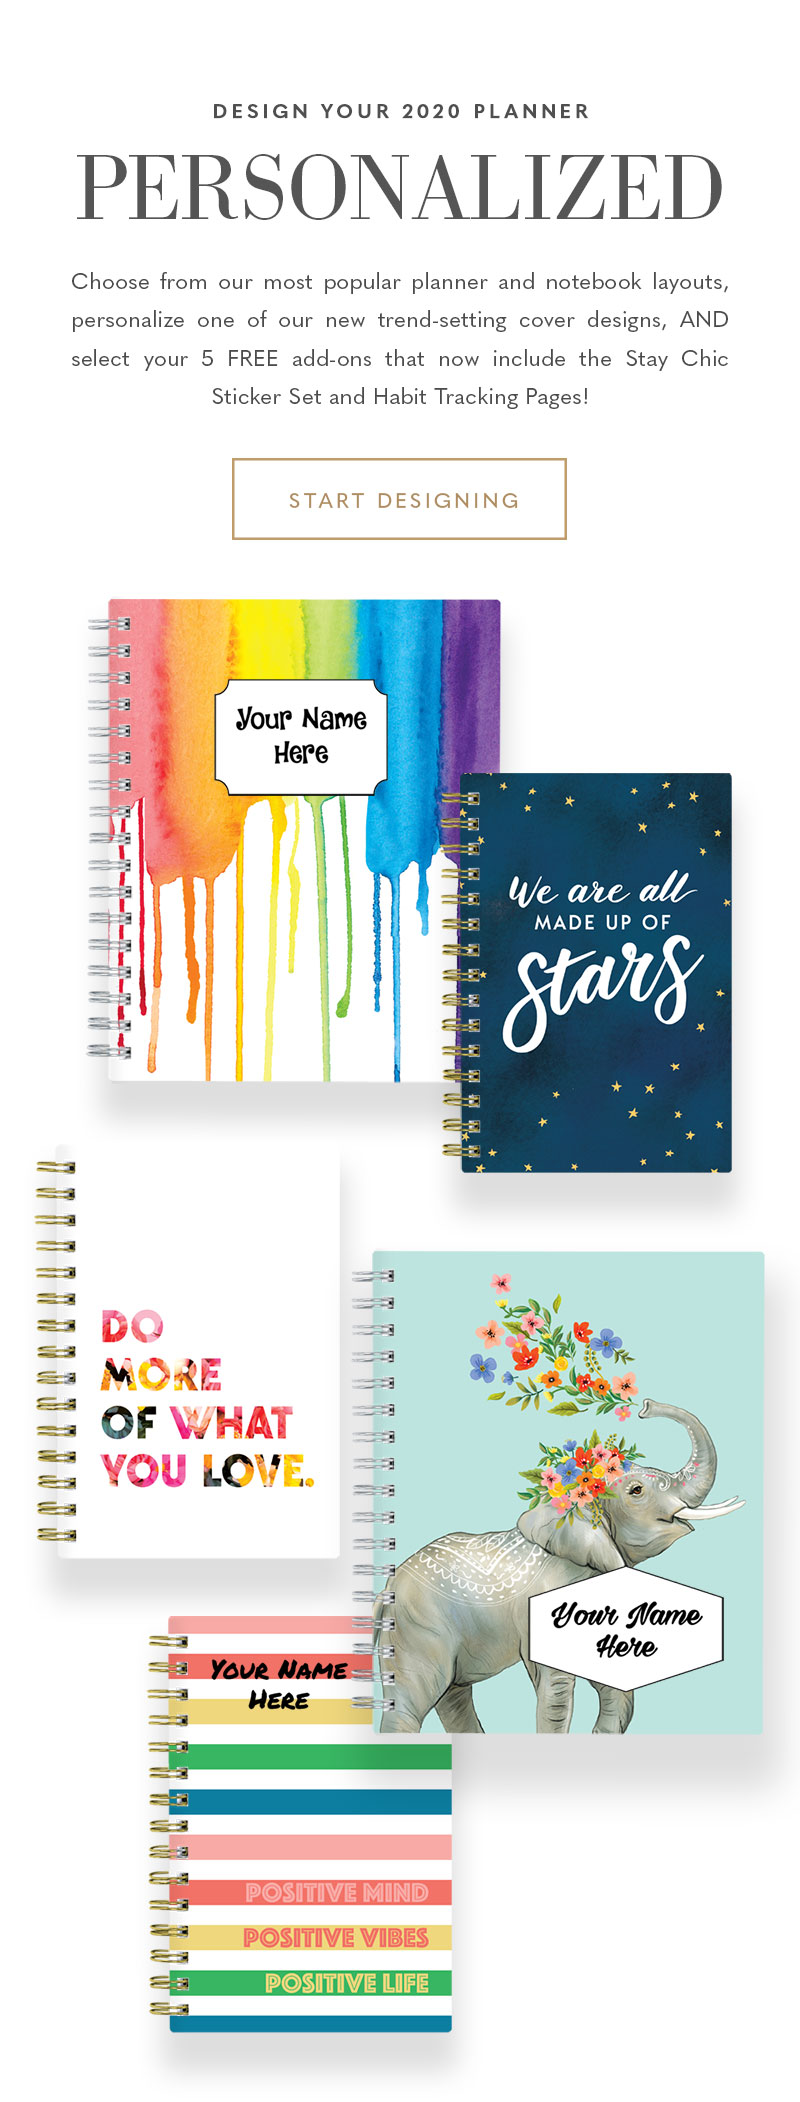 Personalized Planners & Notebooks